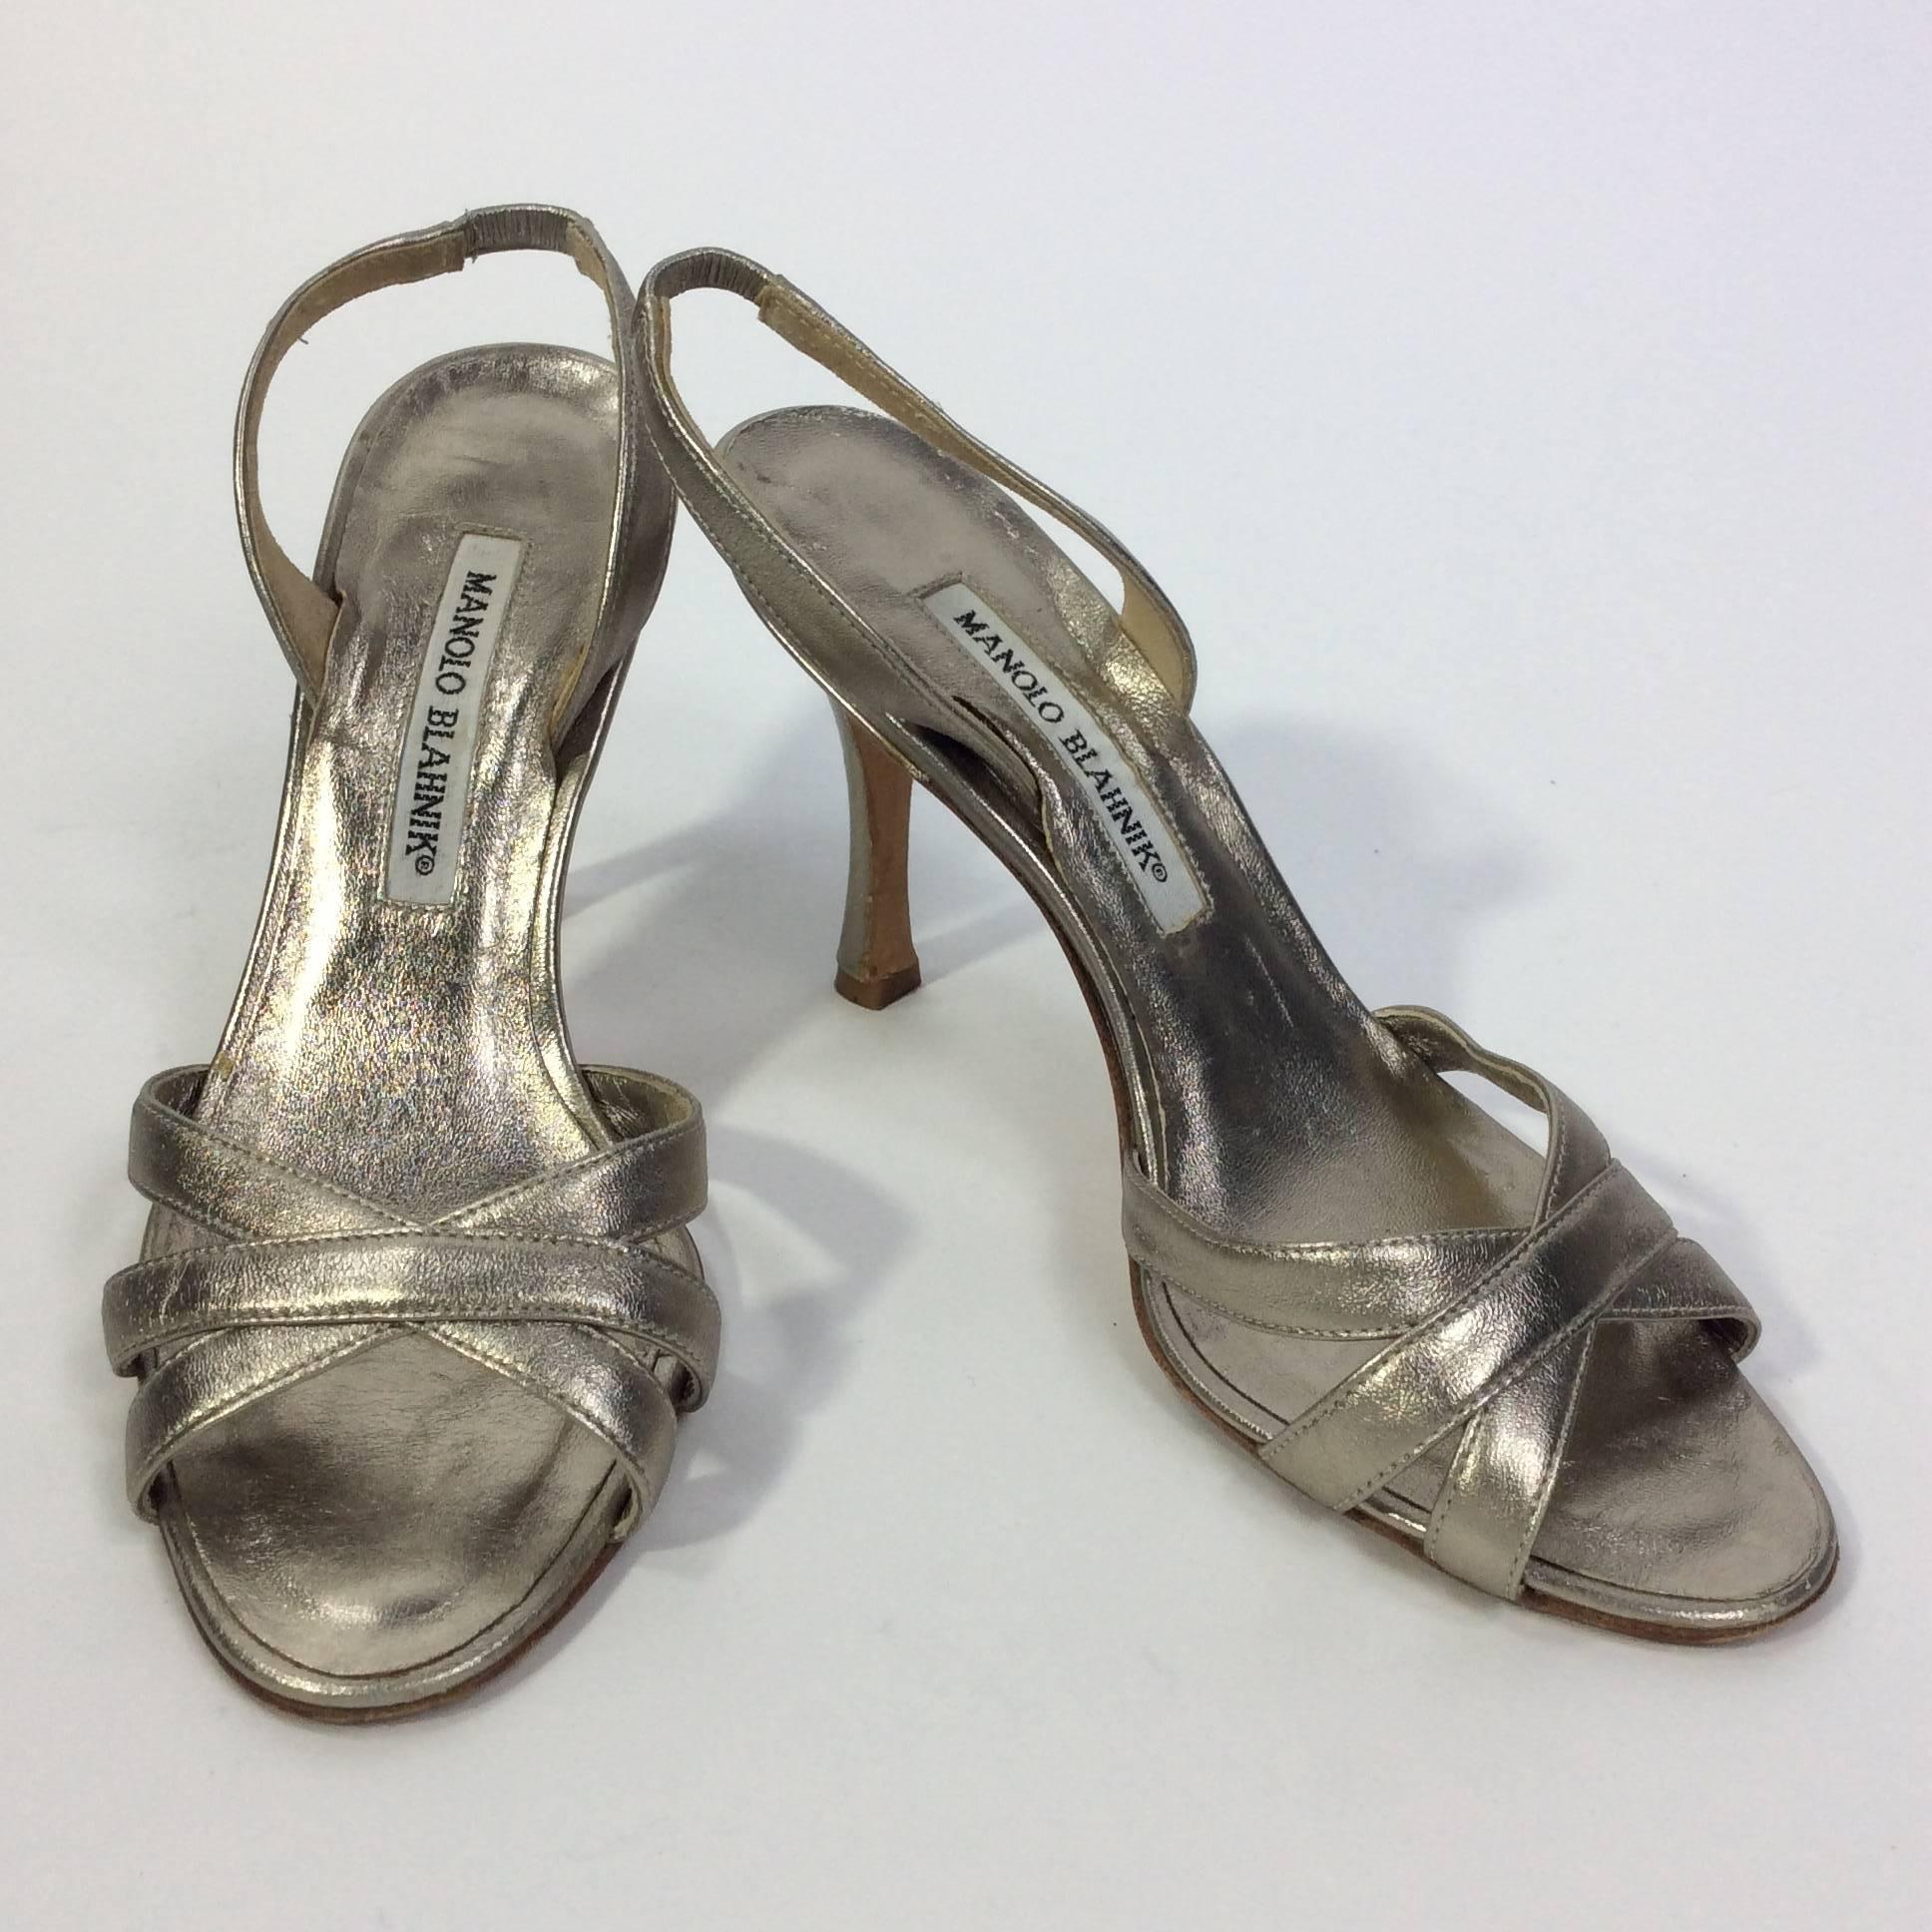 Gold Strap Slingback Sandal
3.5 inch heel
2.75 inch sole width
3 crossed strap front
Elastic slingback style
Size 36 (equates to a US 36)
Leather